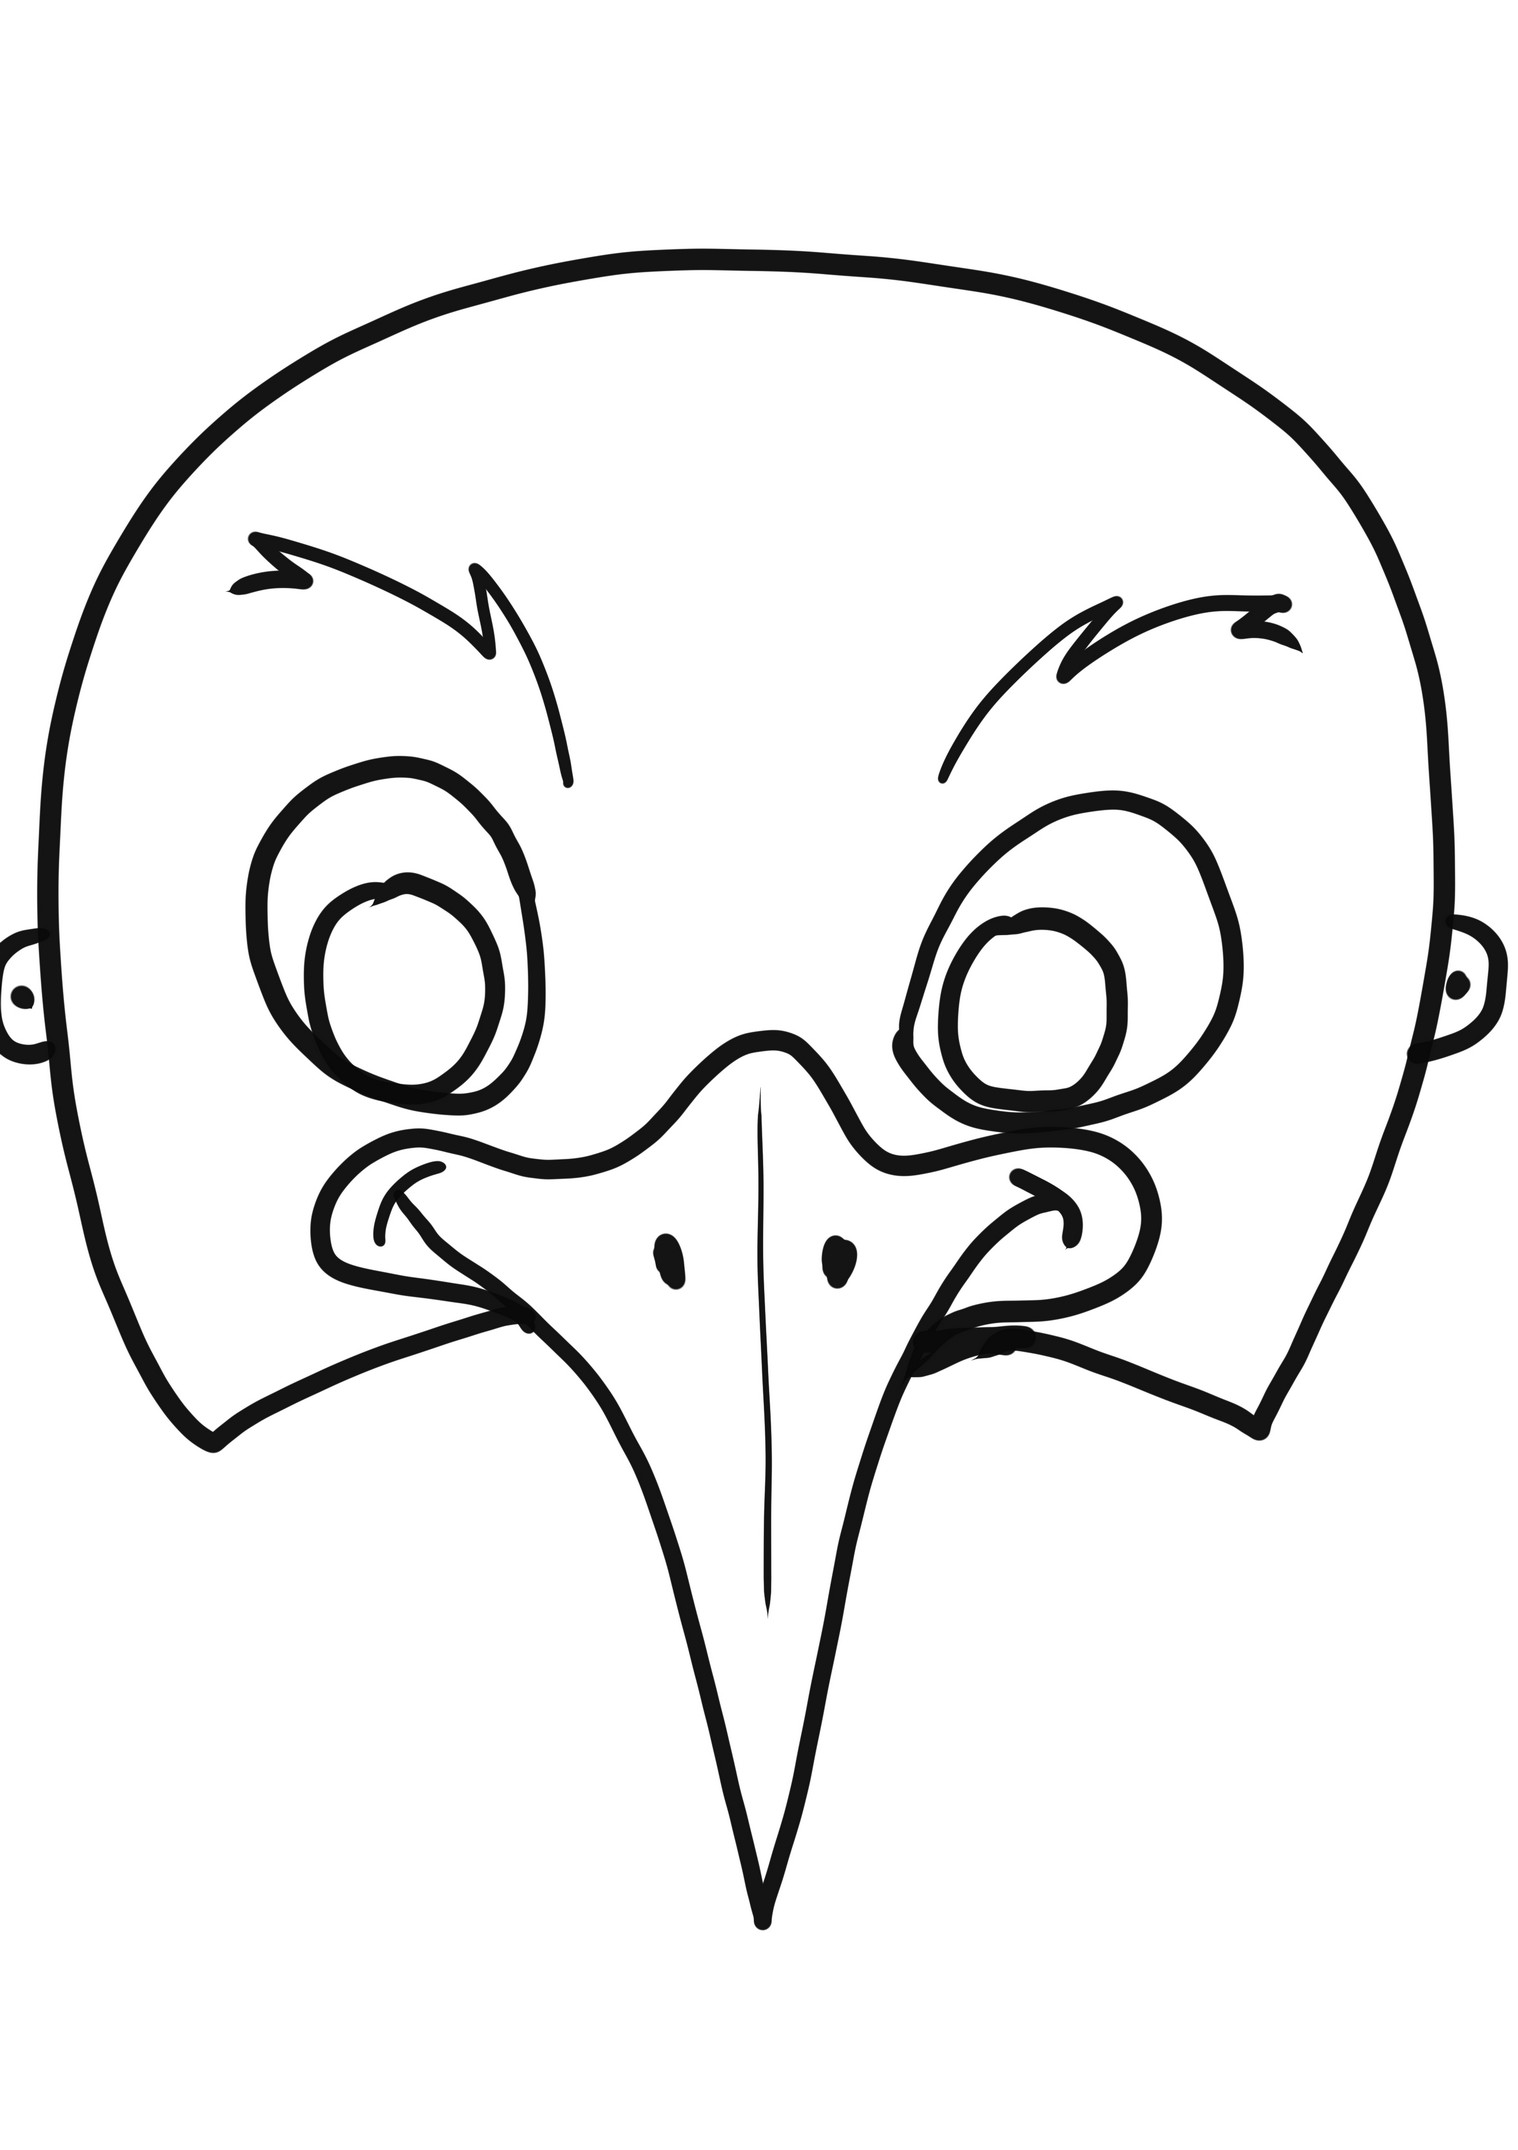 Albatross mask coloring page